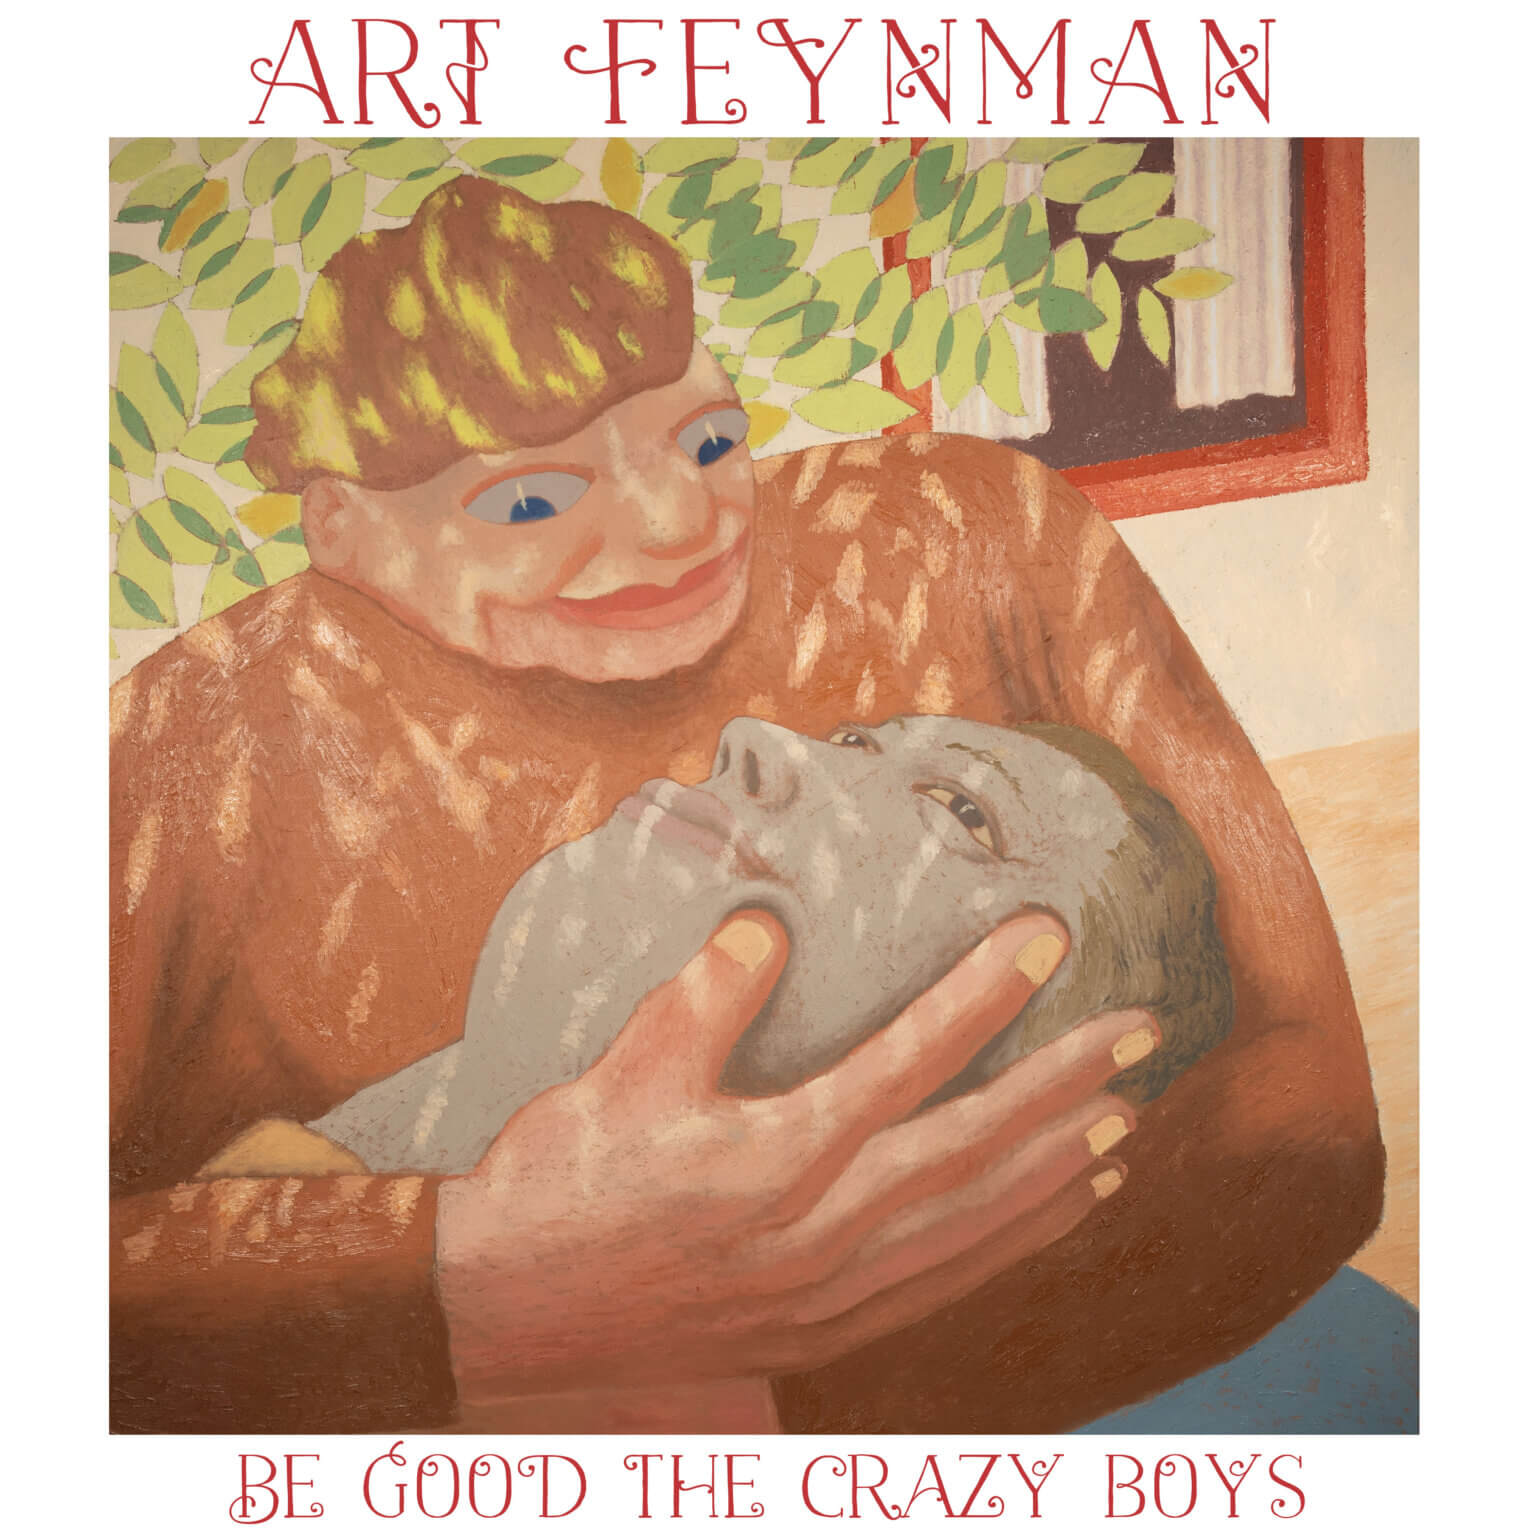 Art Feynman Shares “Passed Over.” The track is off the singer/songwriter's forthcoming album Be God The Crazy Boys